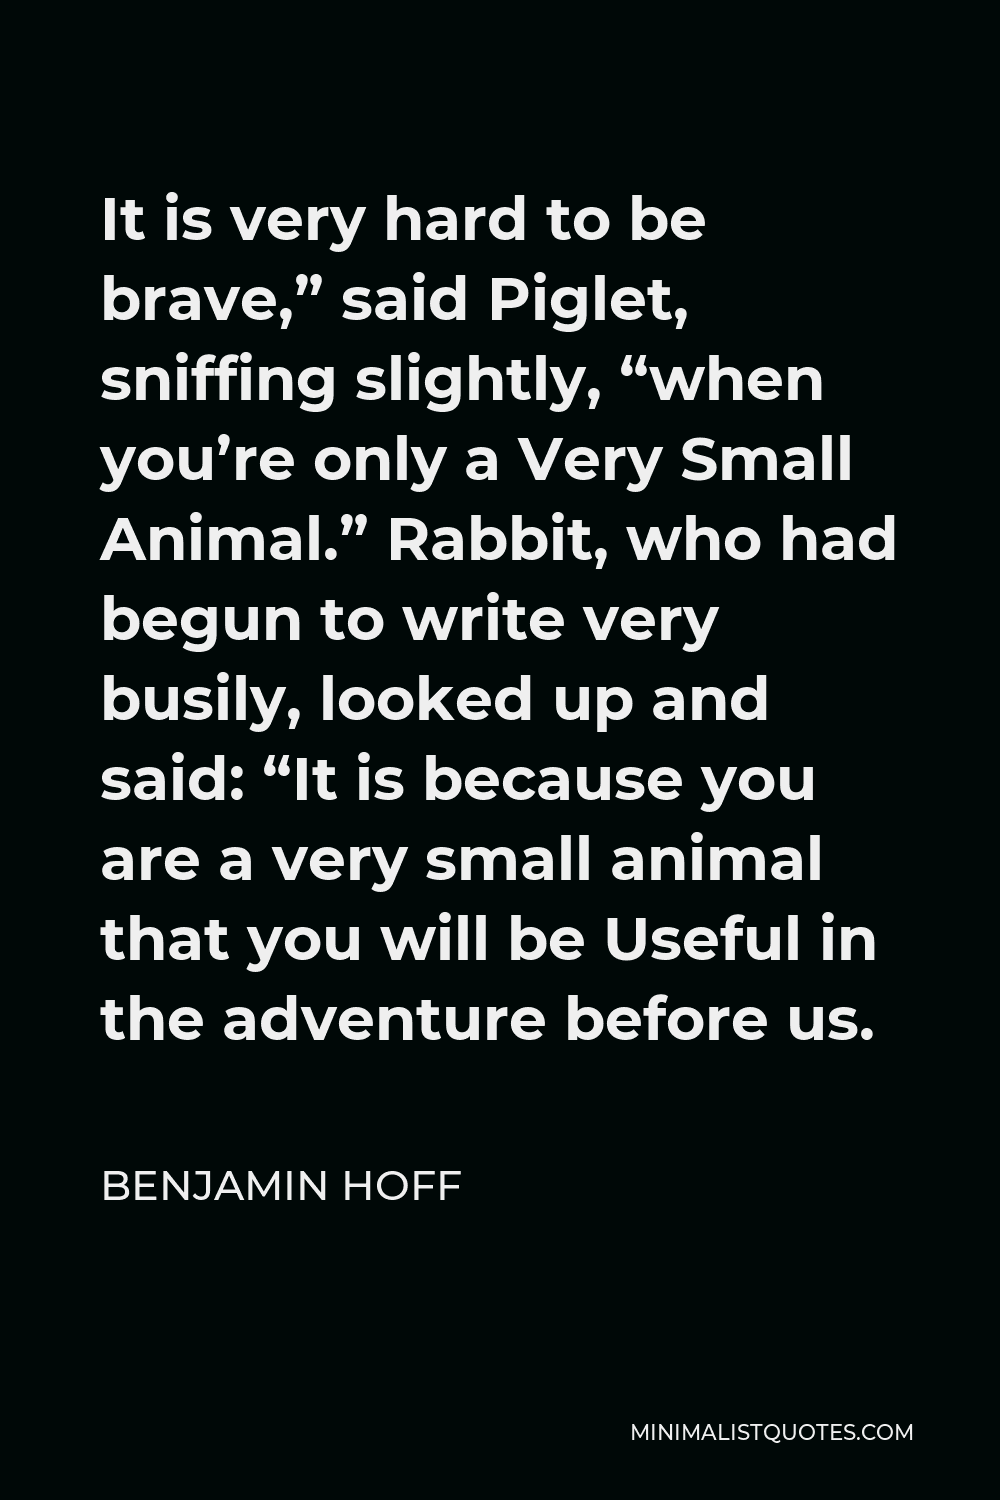 Benjamin Hoff Quote - It is very hard to be brave,” said Piglet, sniffing slightly, “when you’re only a Very Small Animal.” Rabbit, who had begun to write very busily, looked up and said: “It is because you are a very small animal that you will be Useful in the adventure before us.